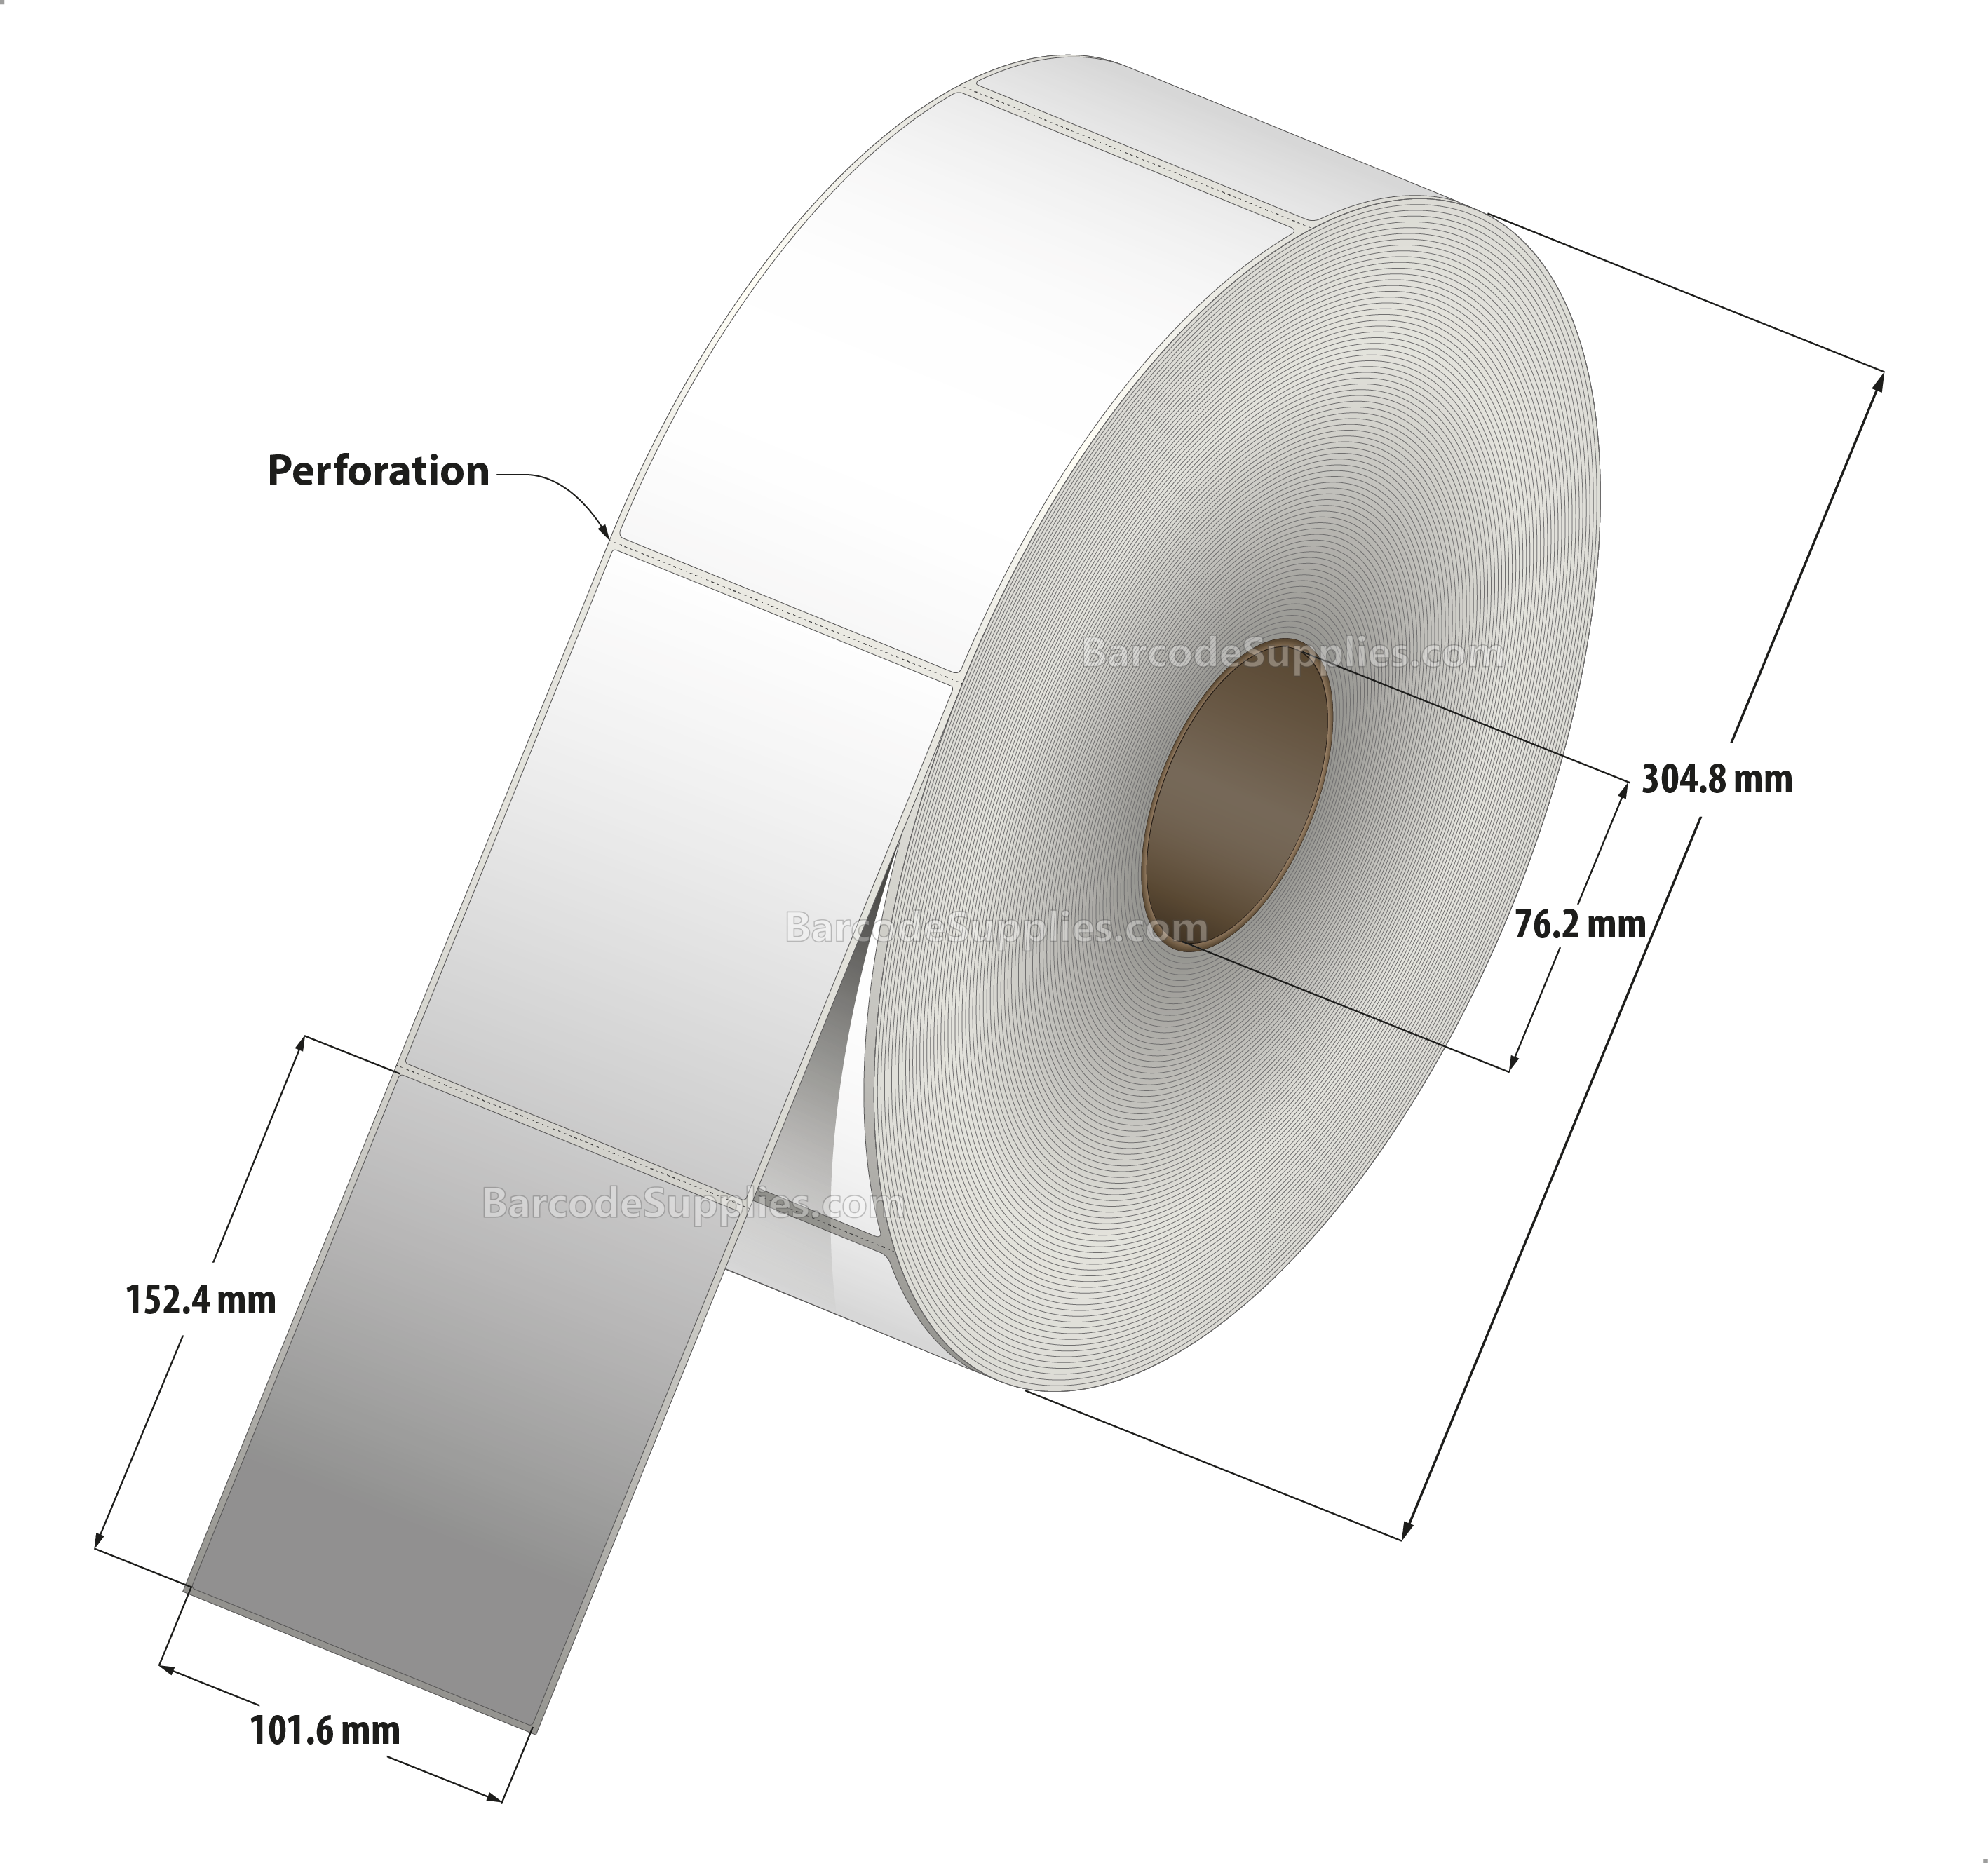 4 x 6 Thermal Transfer White Labels With Permanent Acrylic Adhesive - Perforated - 2800 Labels Per Roll - Carton Of 2 Rolls - 5600 Labels Total - MPN: TH46-112